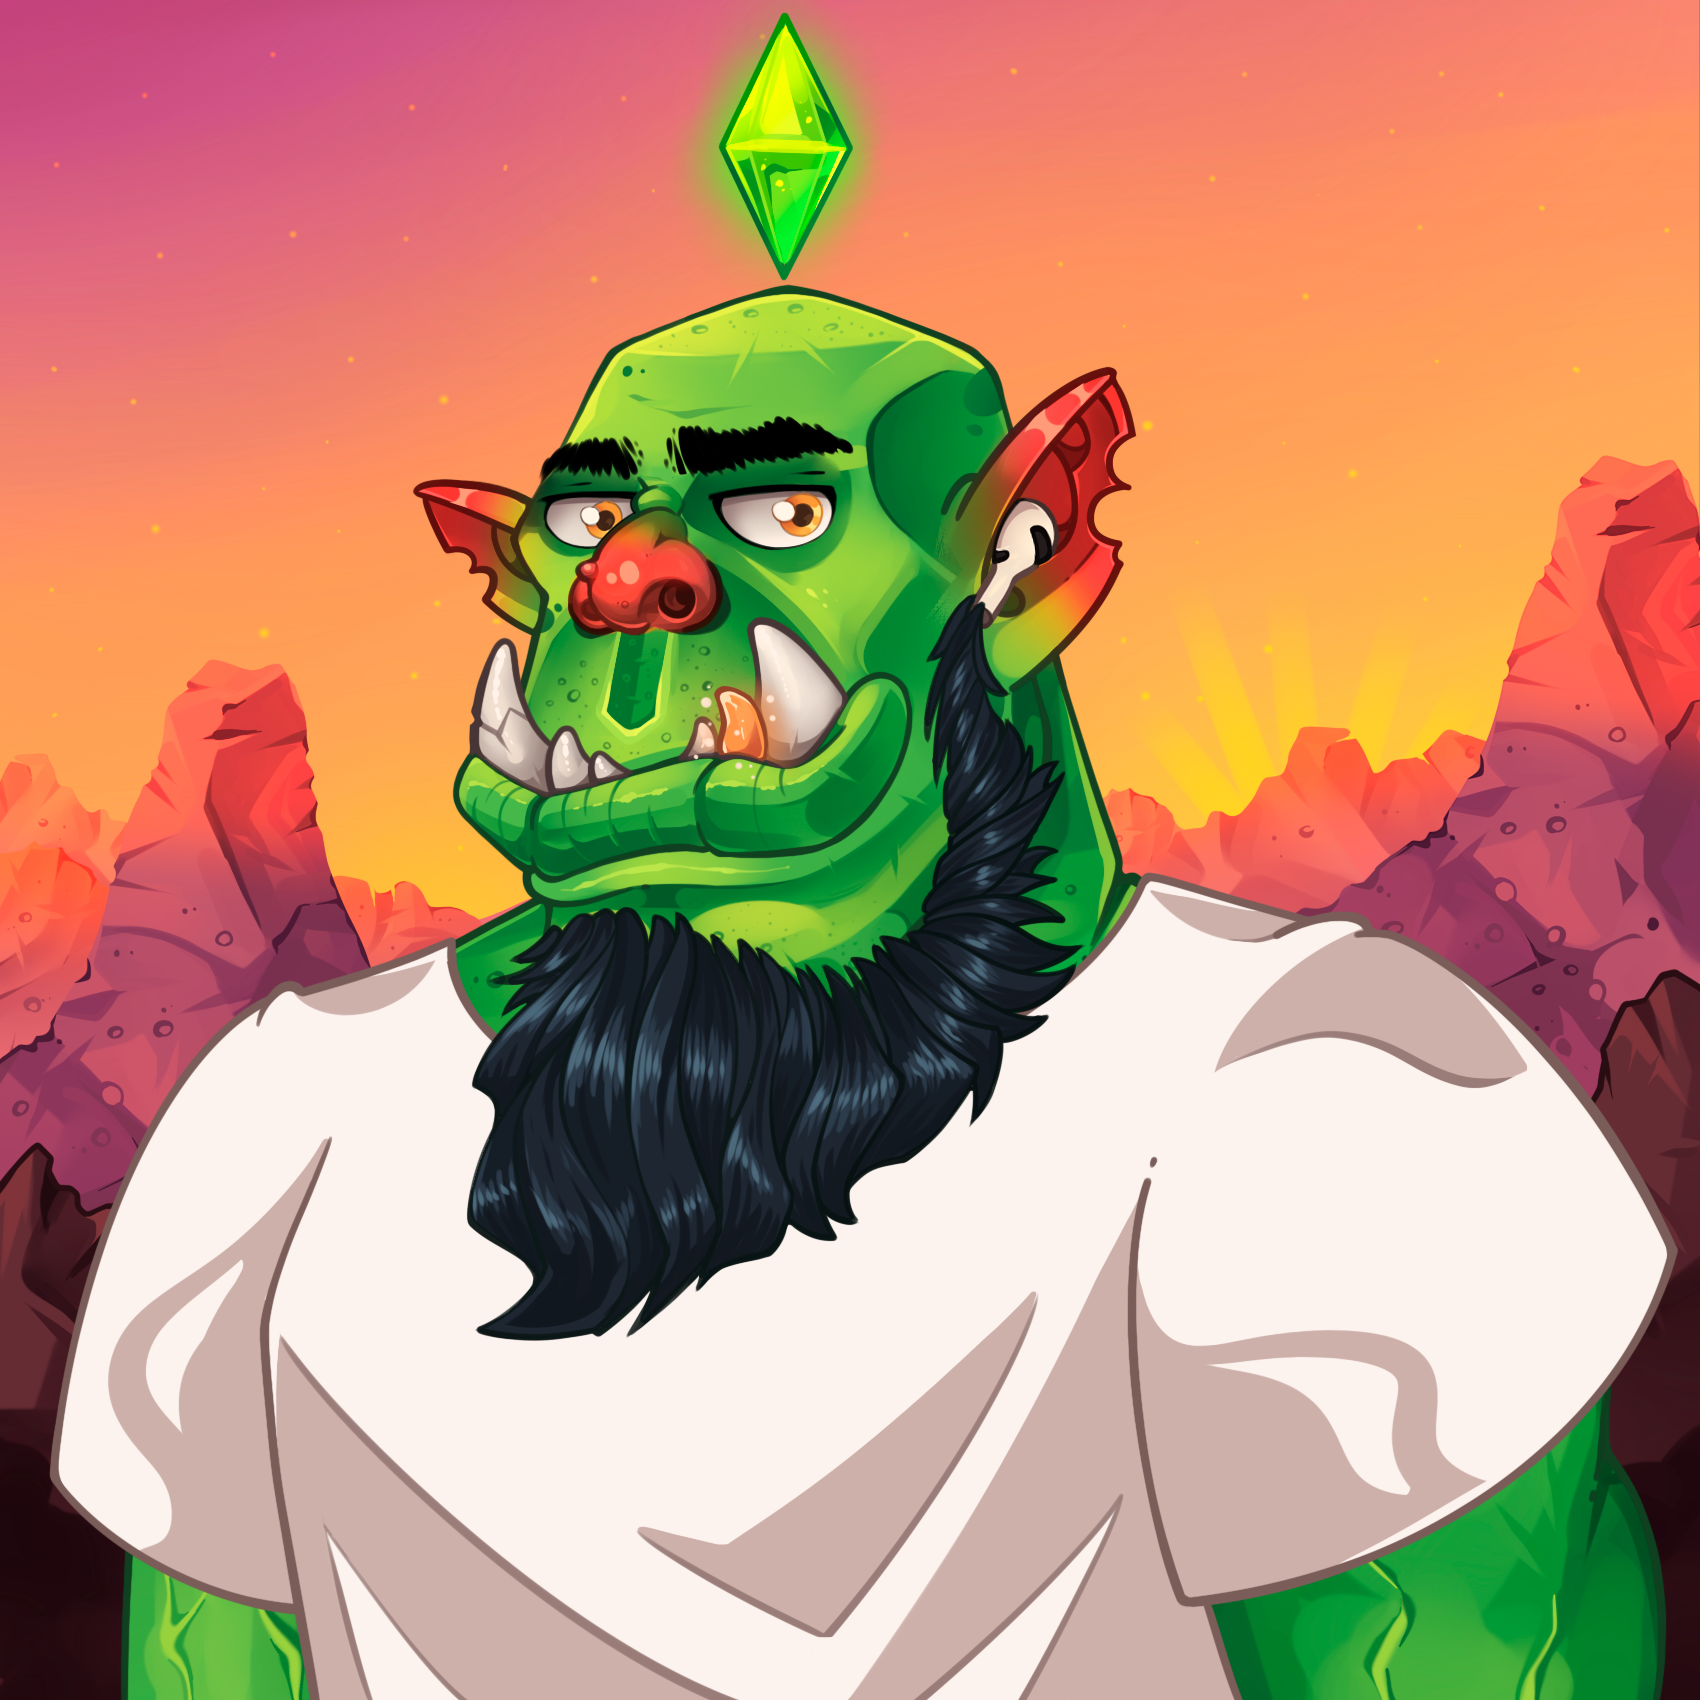 The Orcs #5229